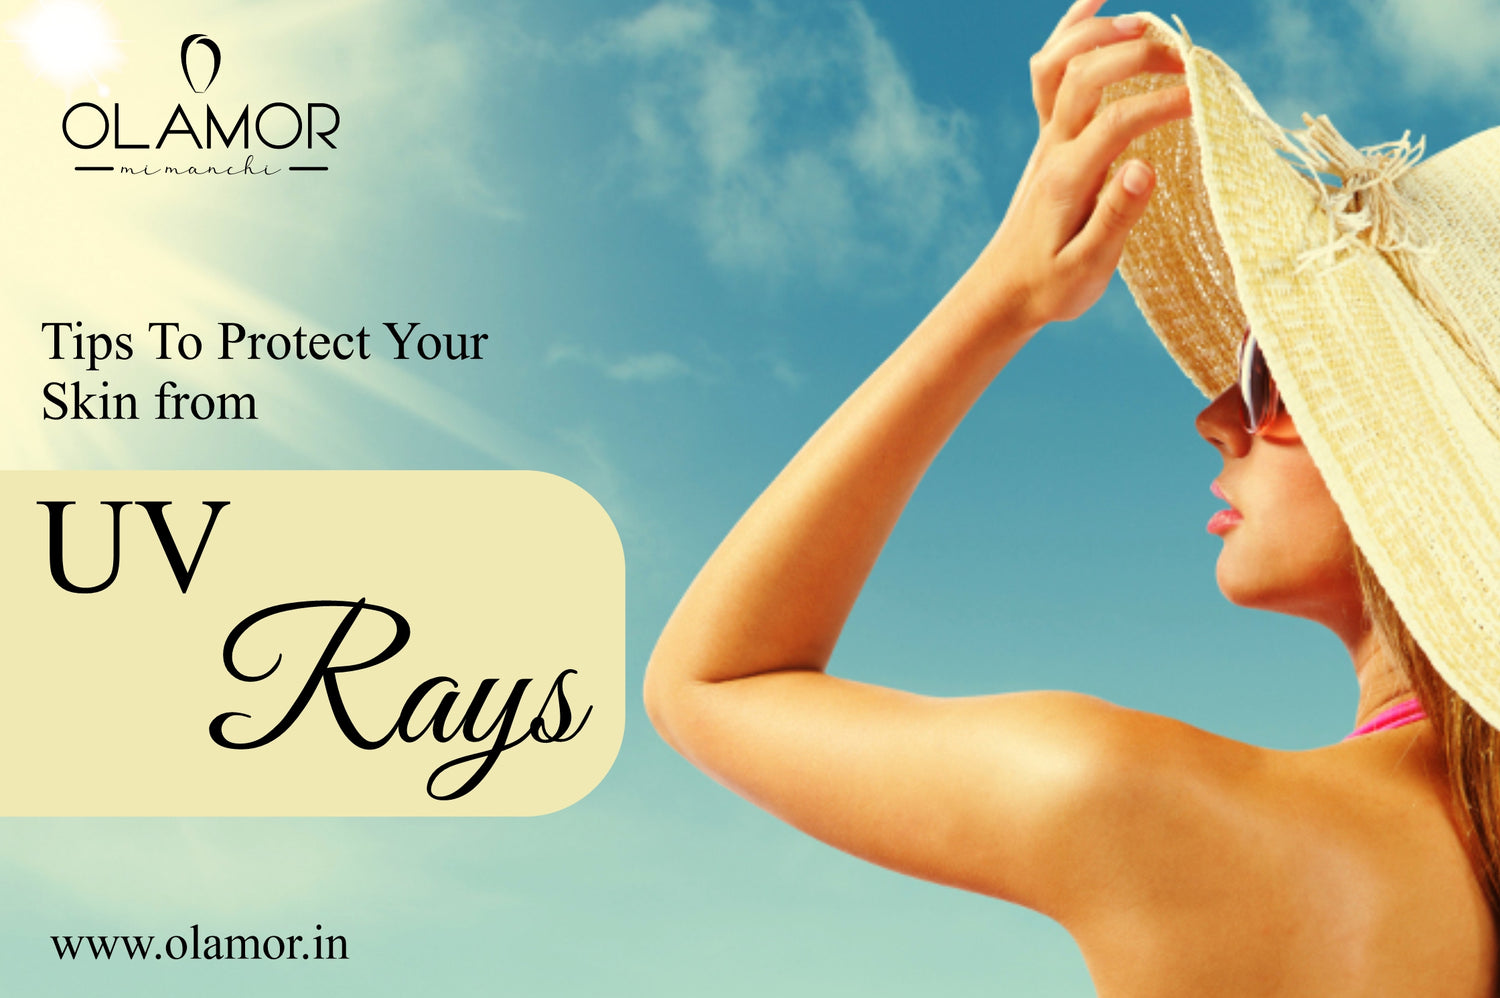 Tips To Protect Your Skin From UV Rays